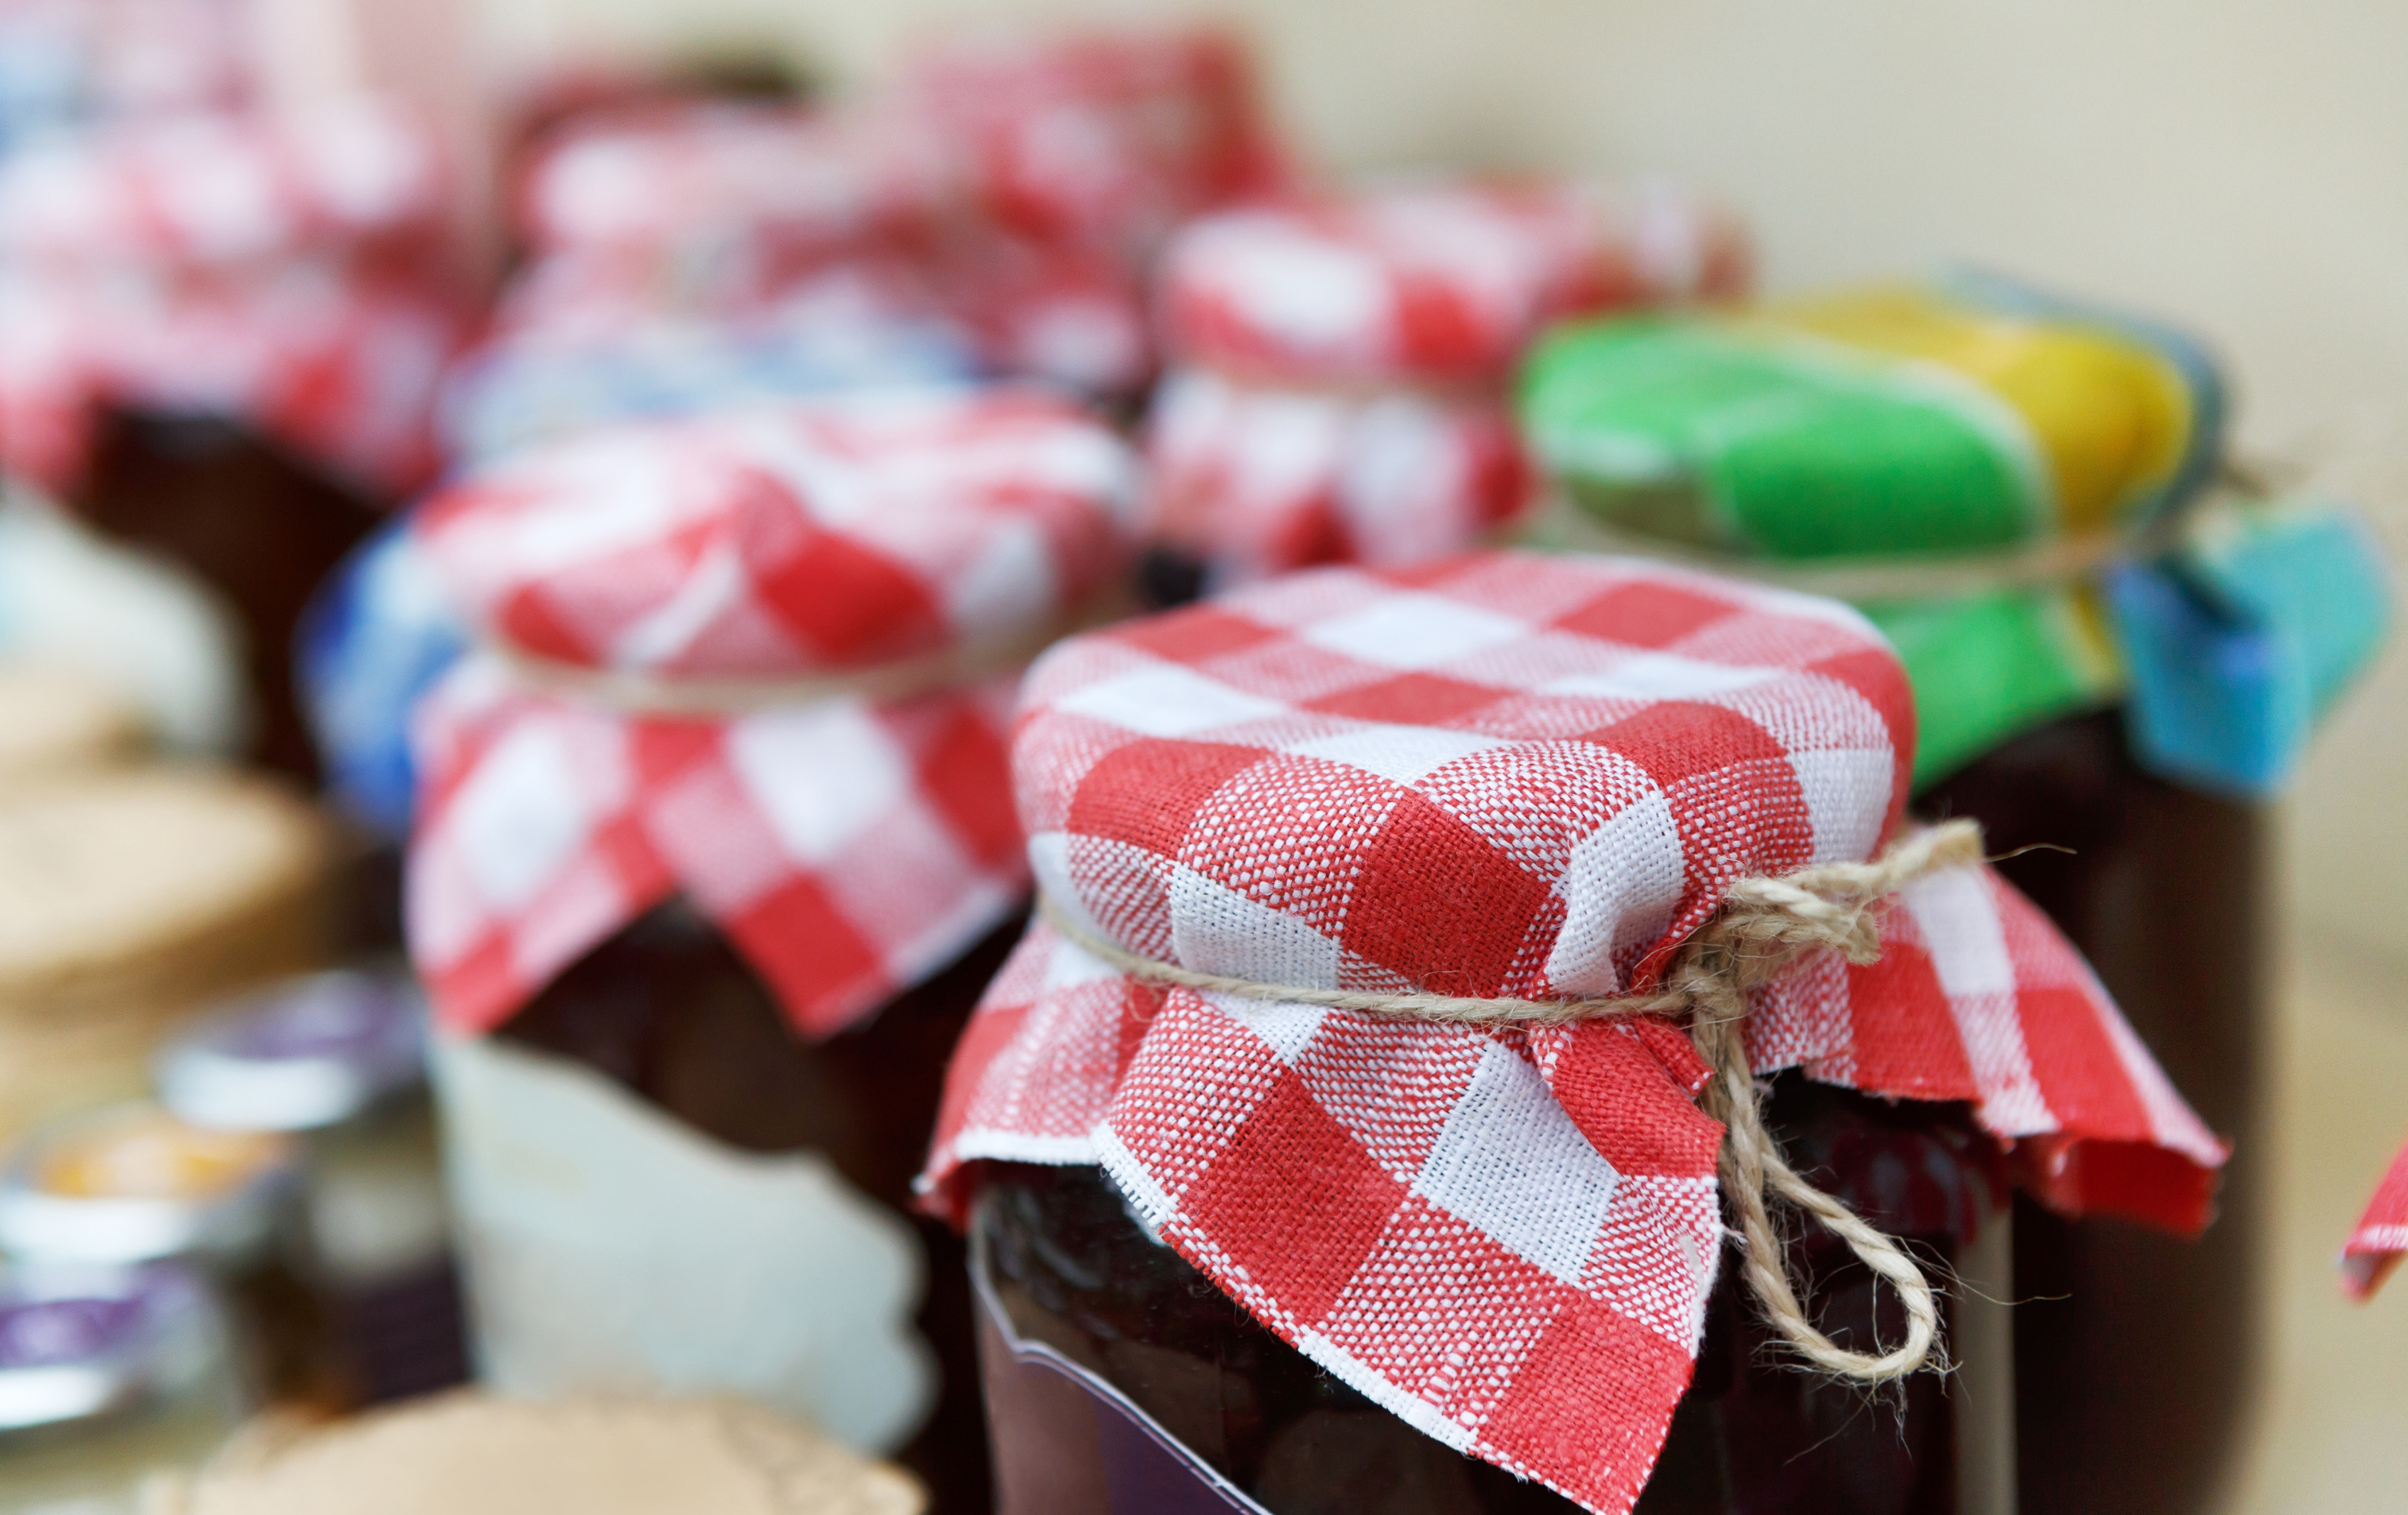 Jars of homemade jam lined up with plaid cloth tops.